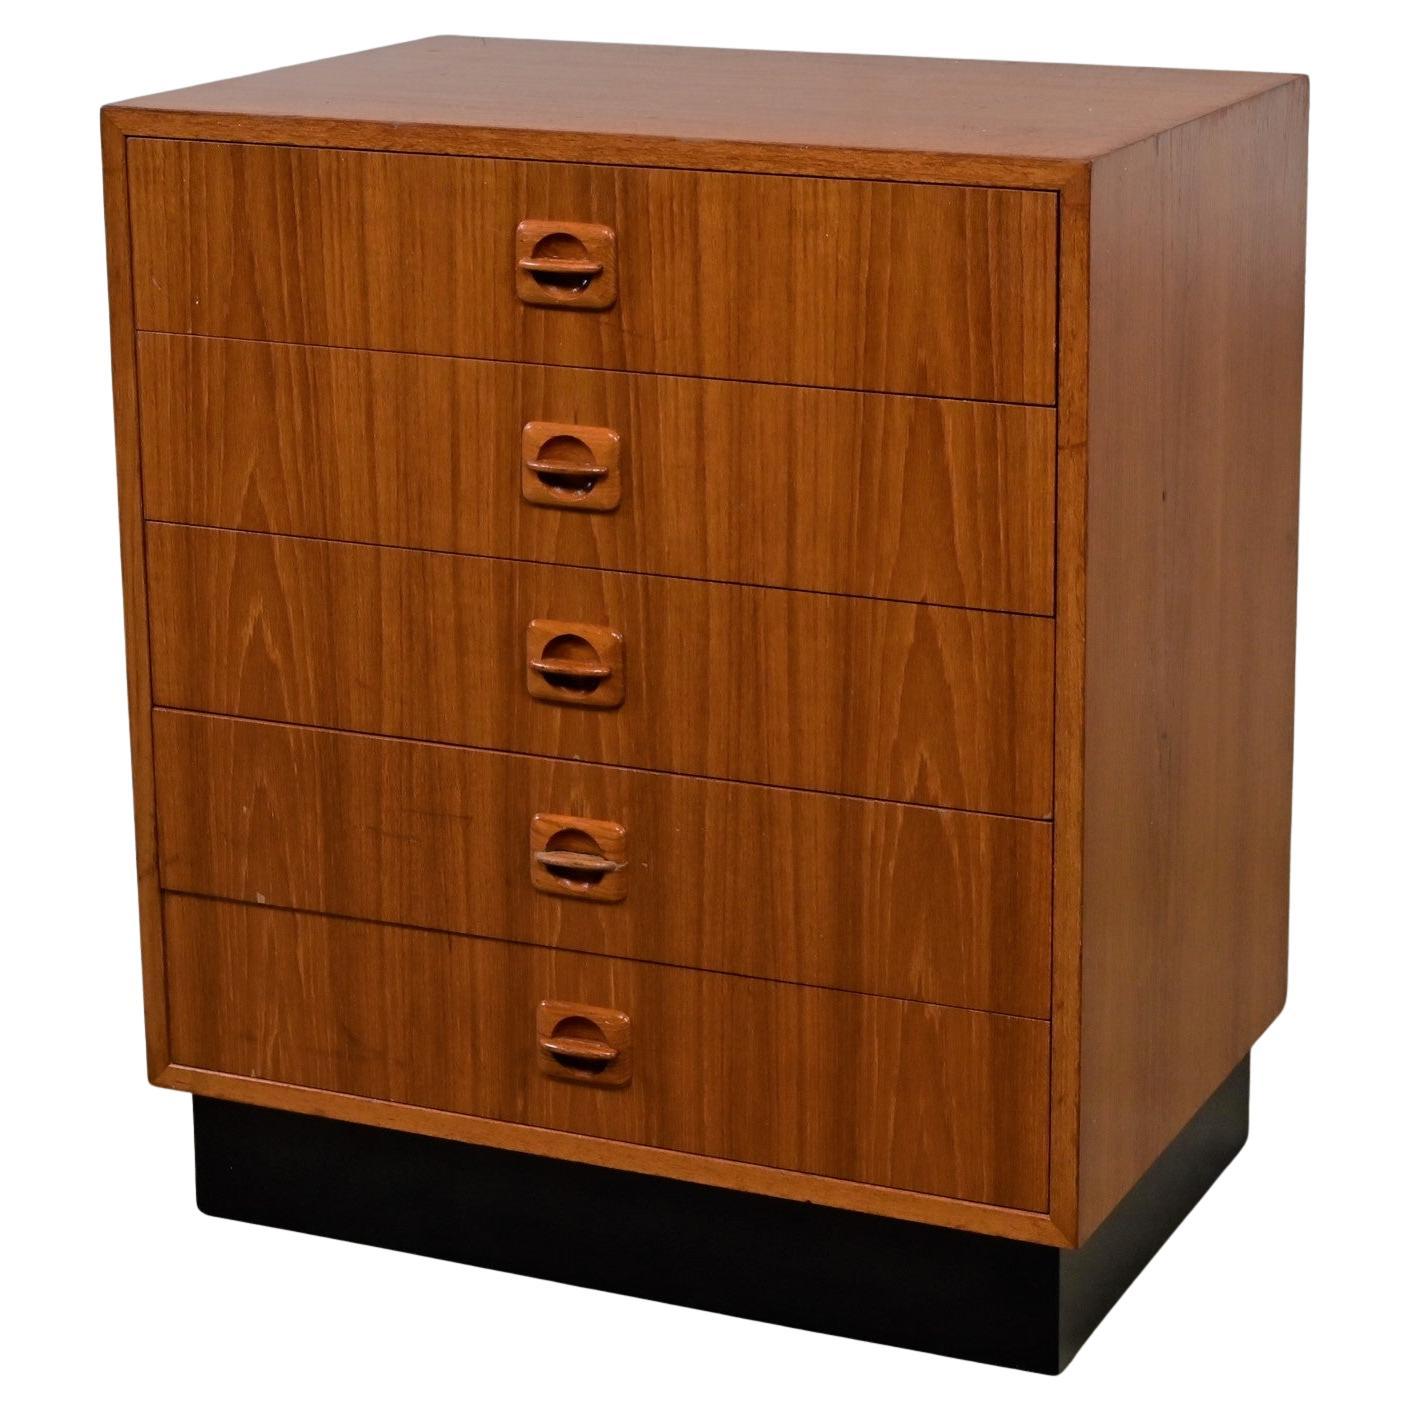 Mid to Late 20th Century Scandinavian Modern Small Teak Cabinet 5 Drawers  For Sale